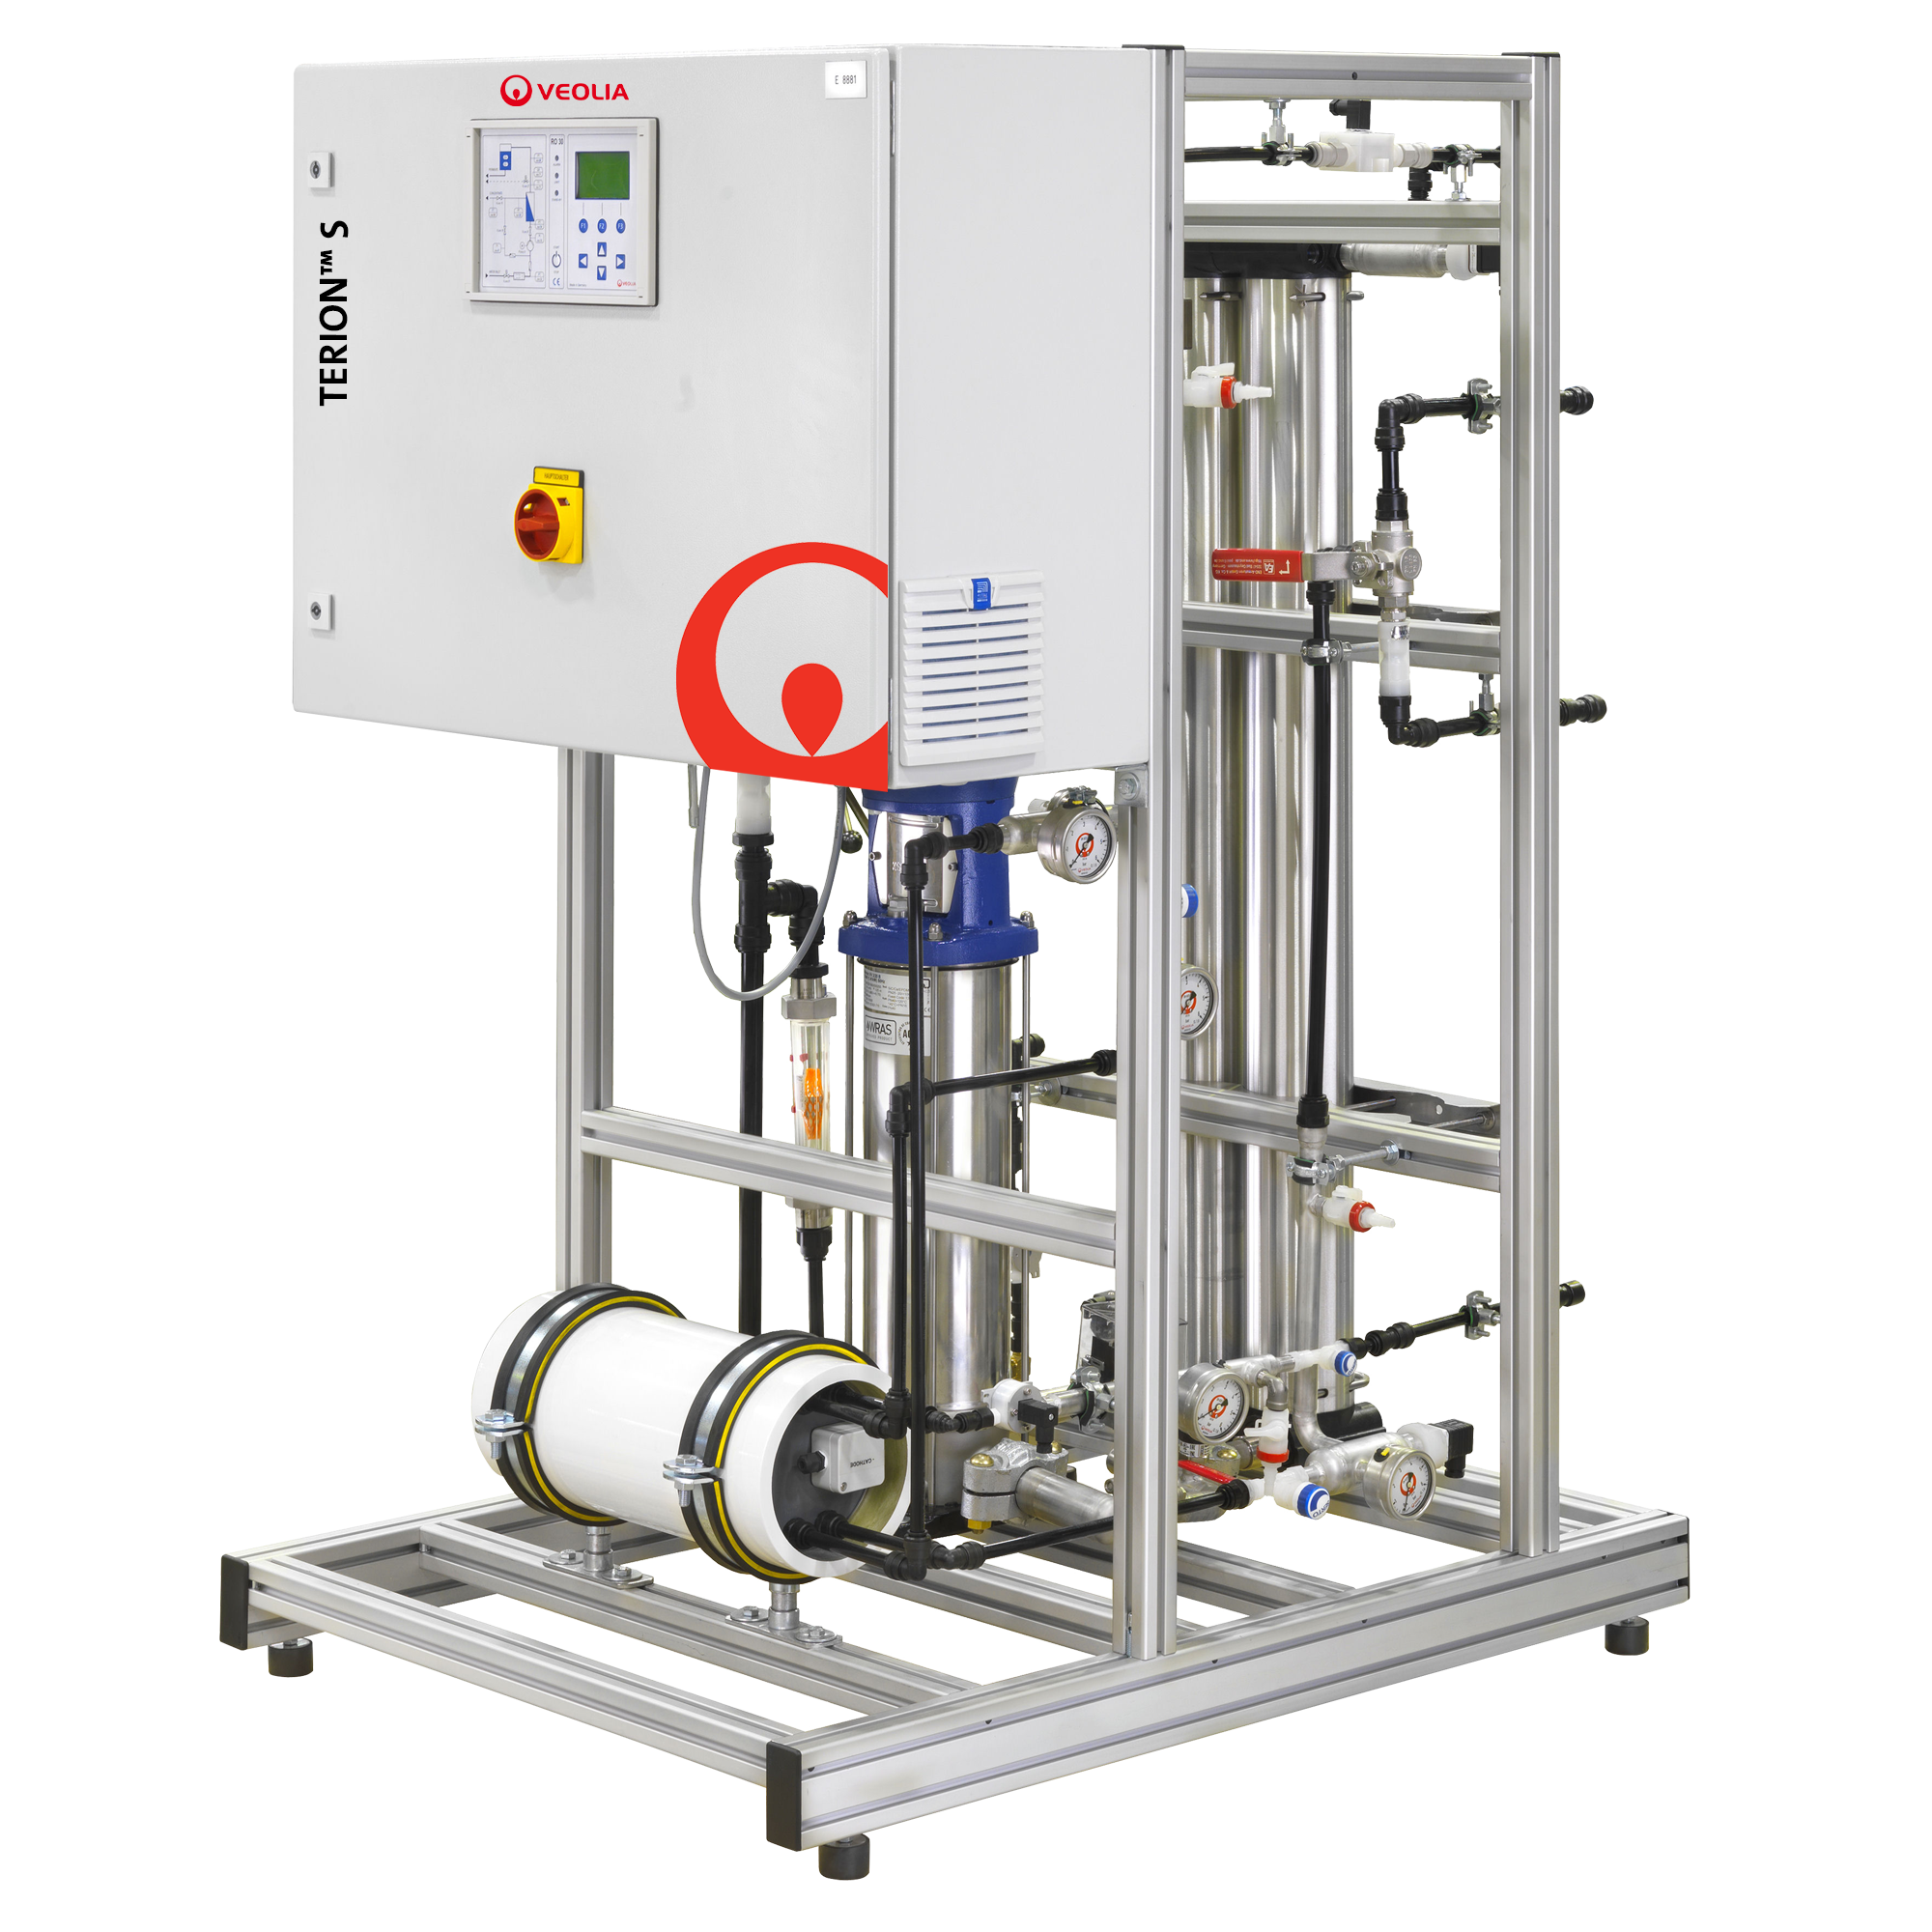 The TERION S standard single-skid unit combines single pass reverse osmosis (RO) and continuous electrodeionization (CEDI) to produce high-grade deionised water.